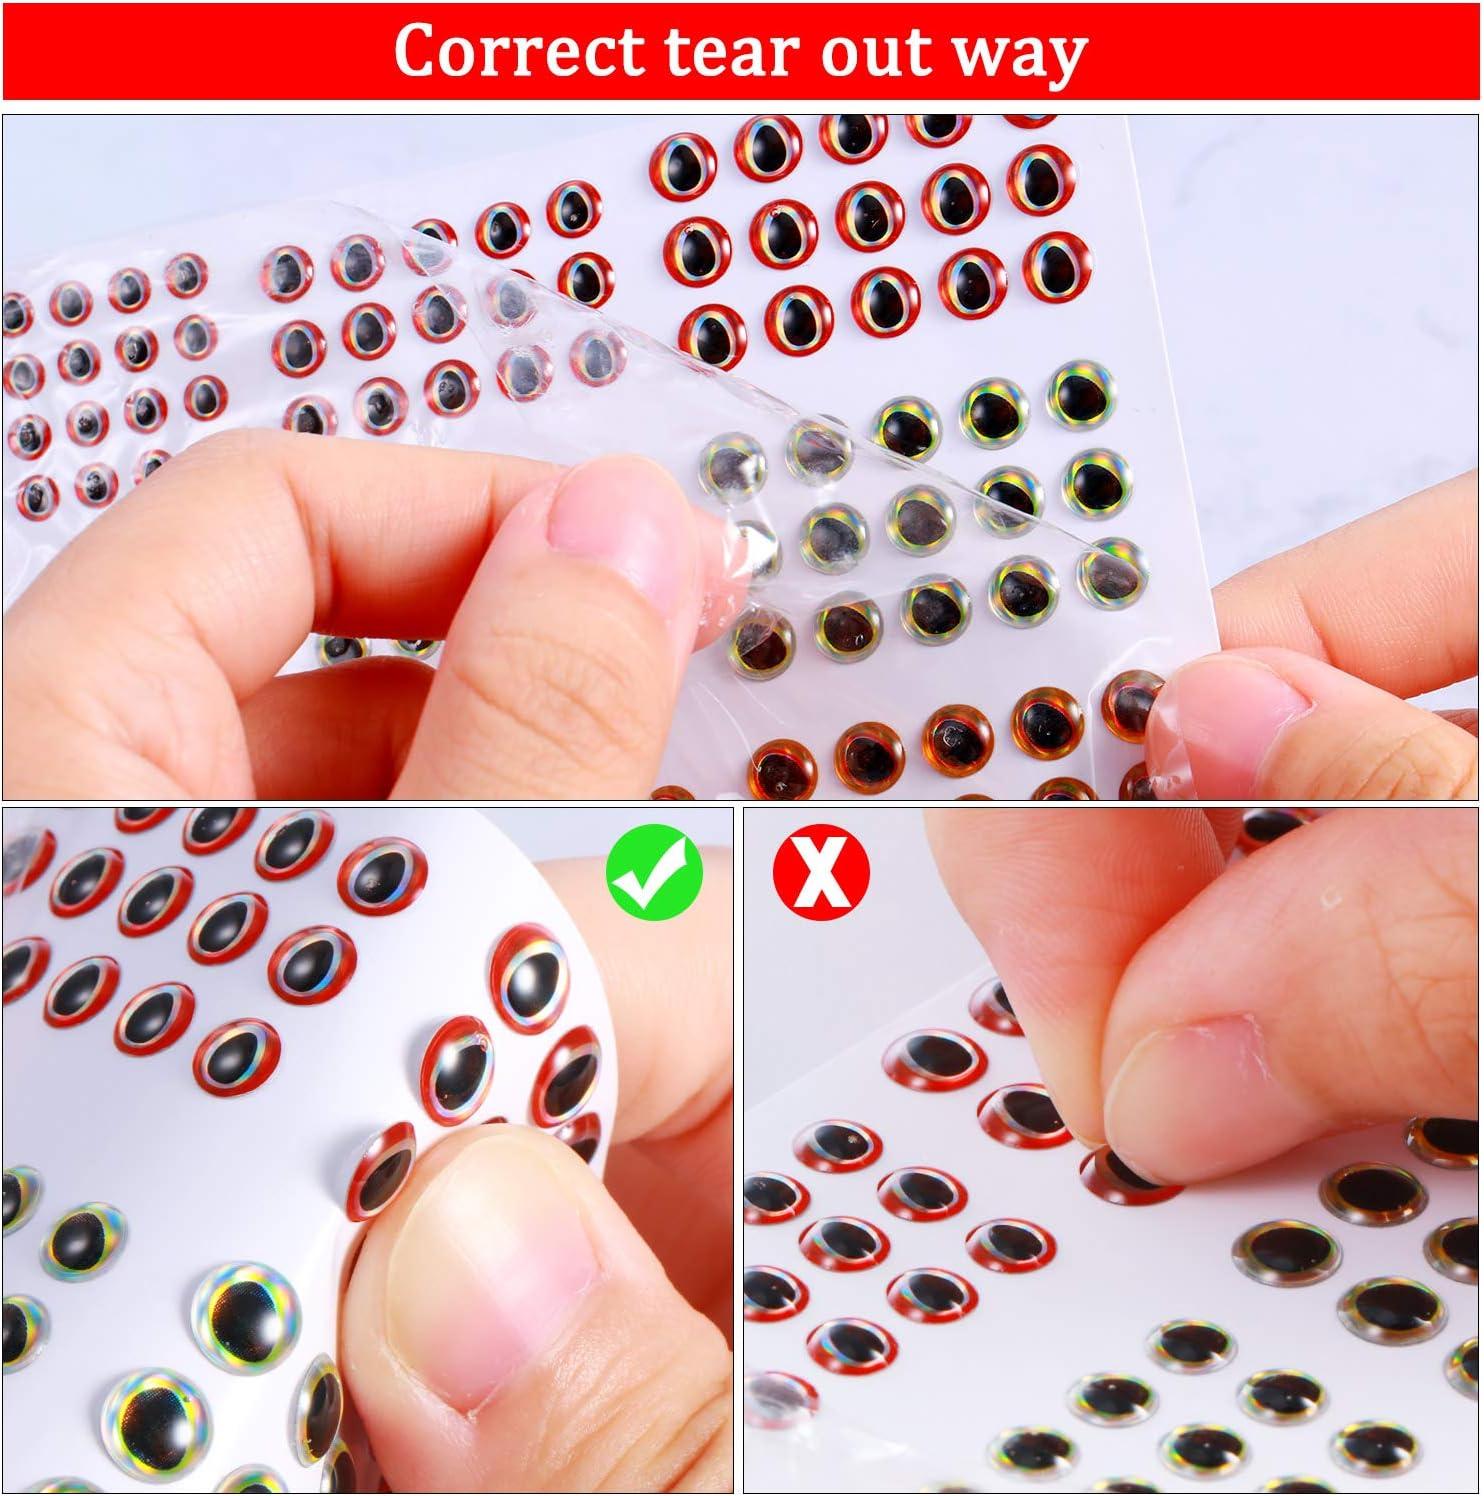 YUAAO 1242 Pieces 3D 4D Fishing Eyes Oval Fishing Lure Eyes Realistic Fishing  Eye for Making Fishing Bait Fly Tying Streamers Lures Crafts 6 Sizes: 3mm/  4mm/ 5mm/ 6mm/ 8mm/ 10mm (Multicolor-1242 Pcs)